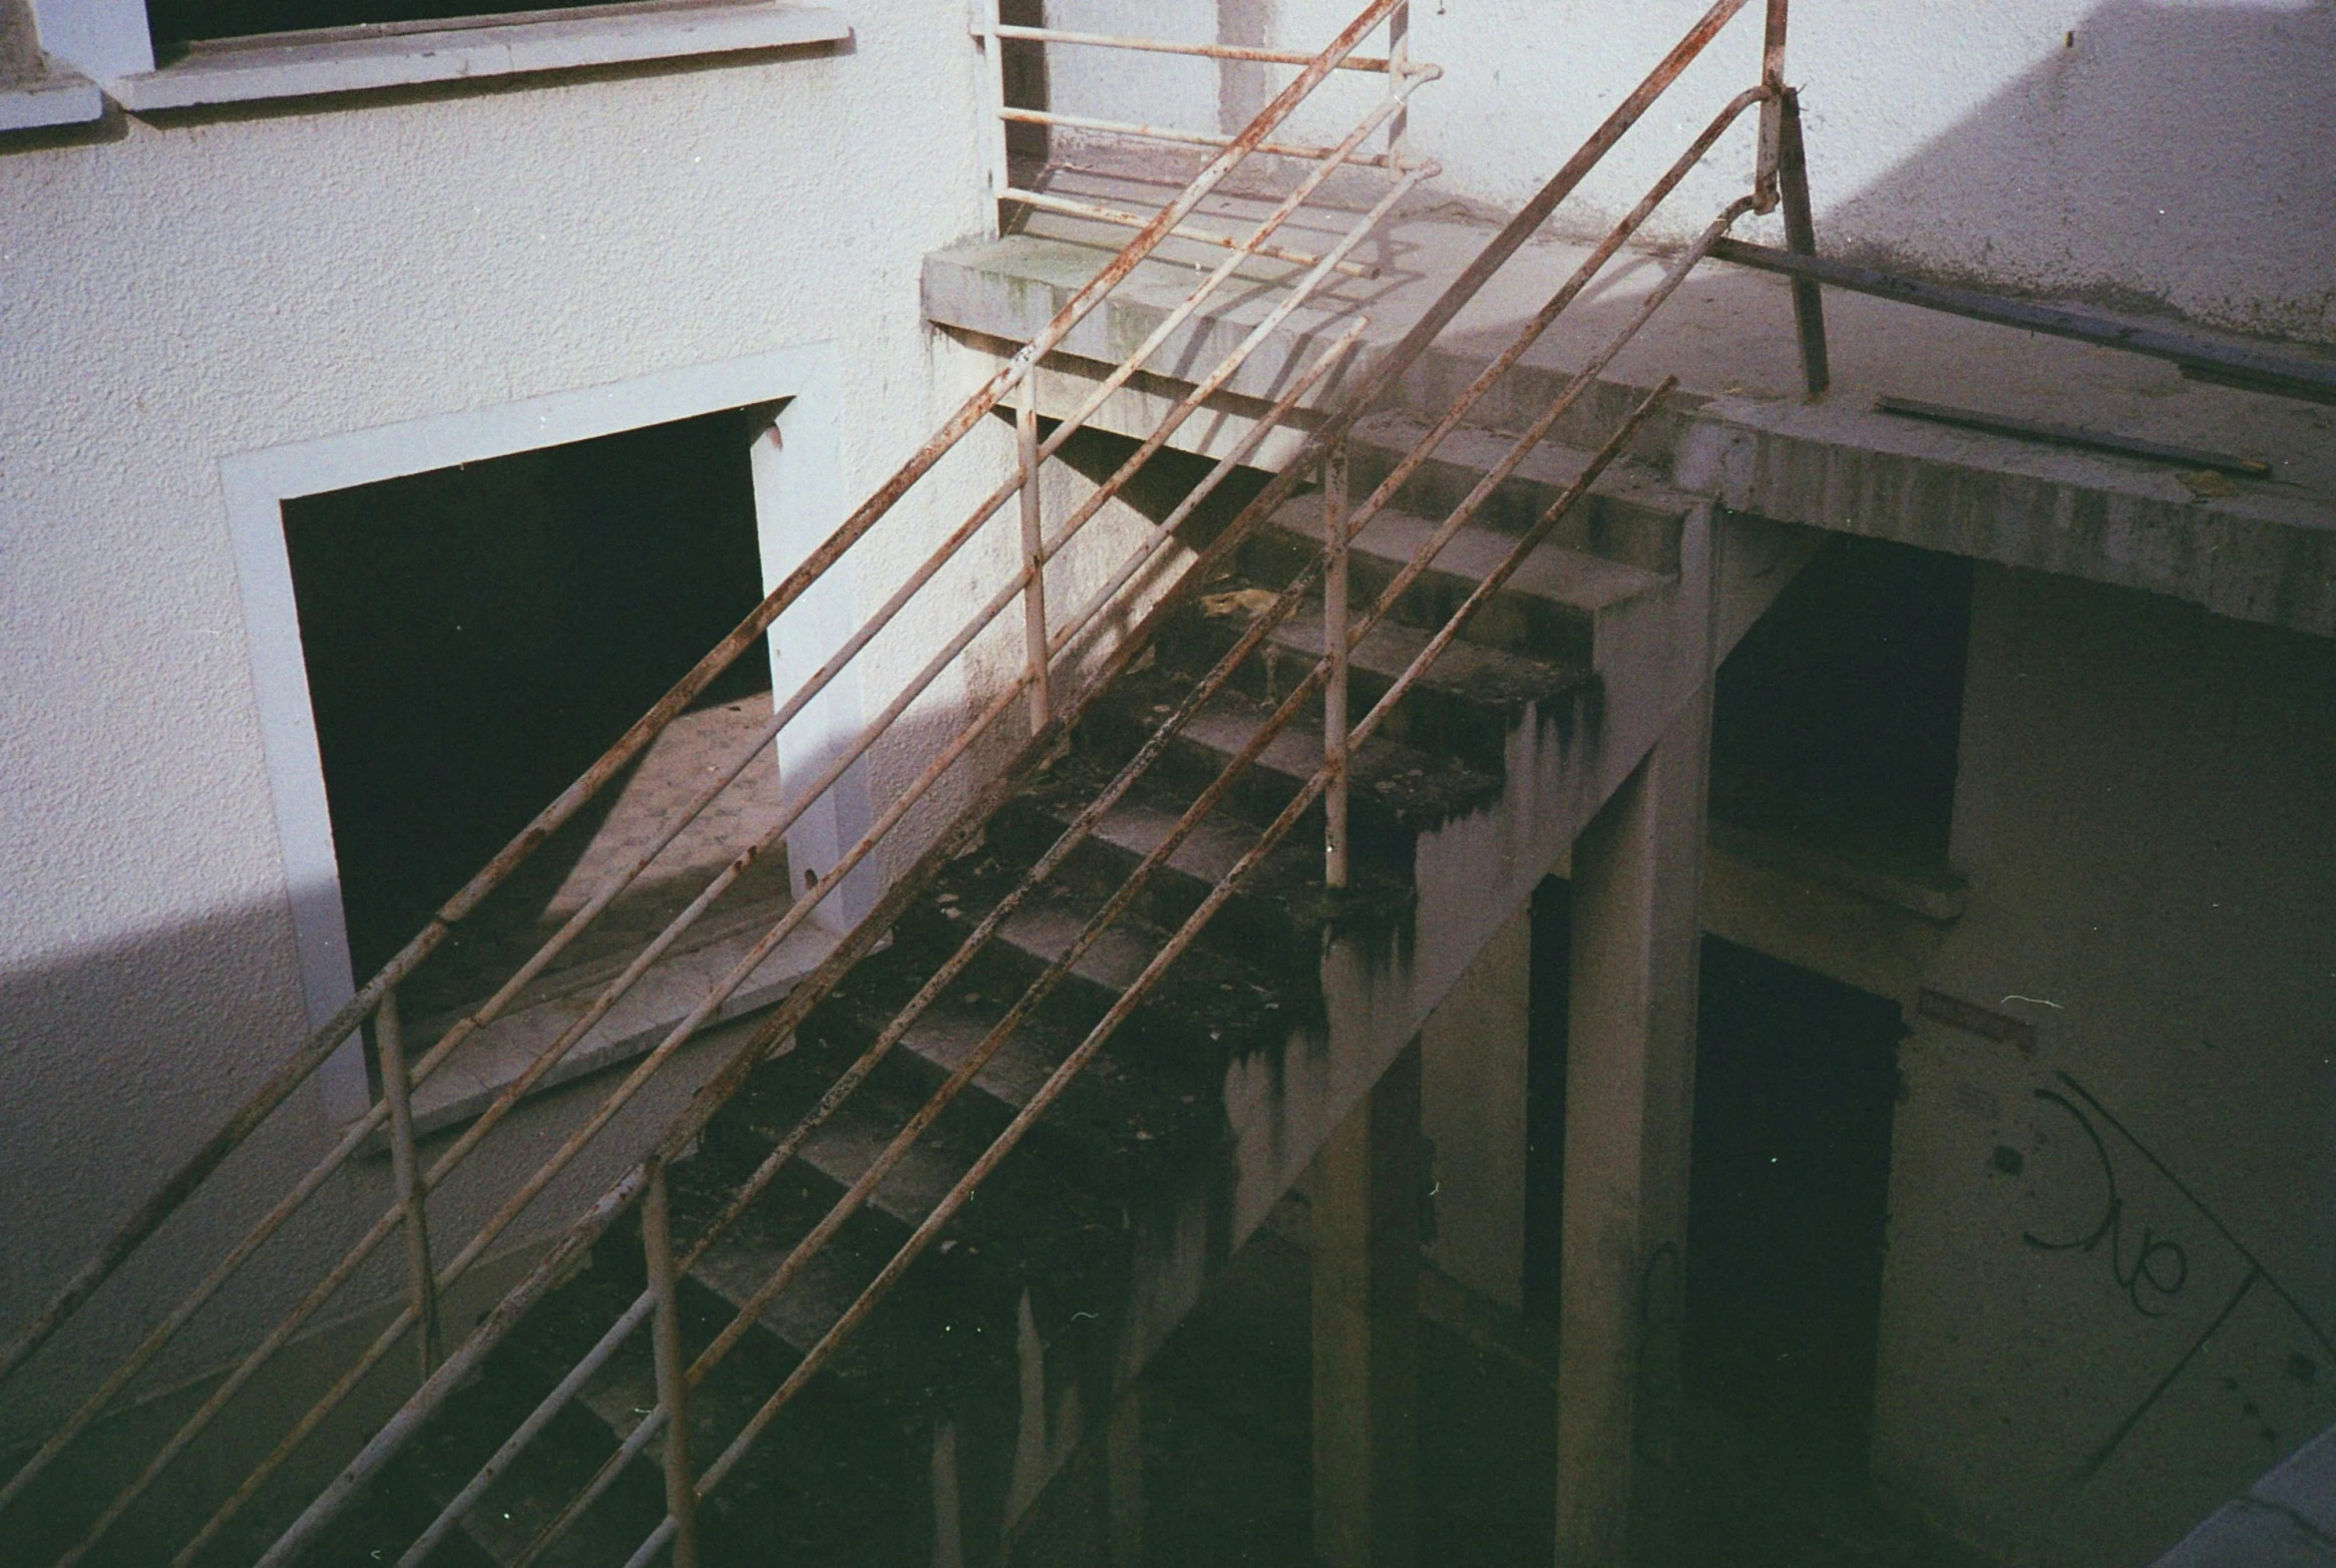 some stairs going up onto a building